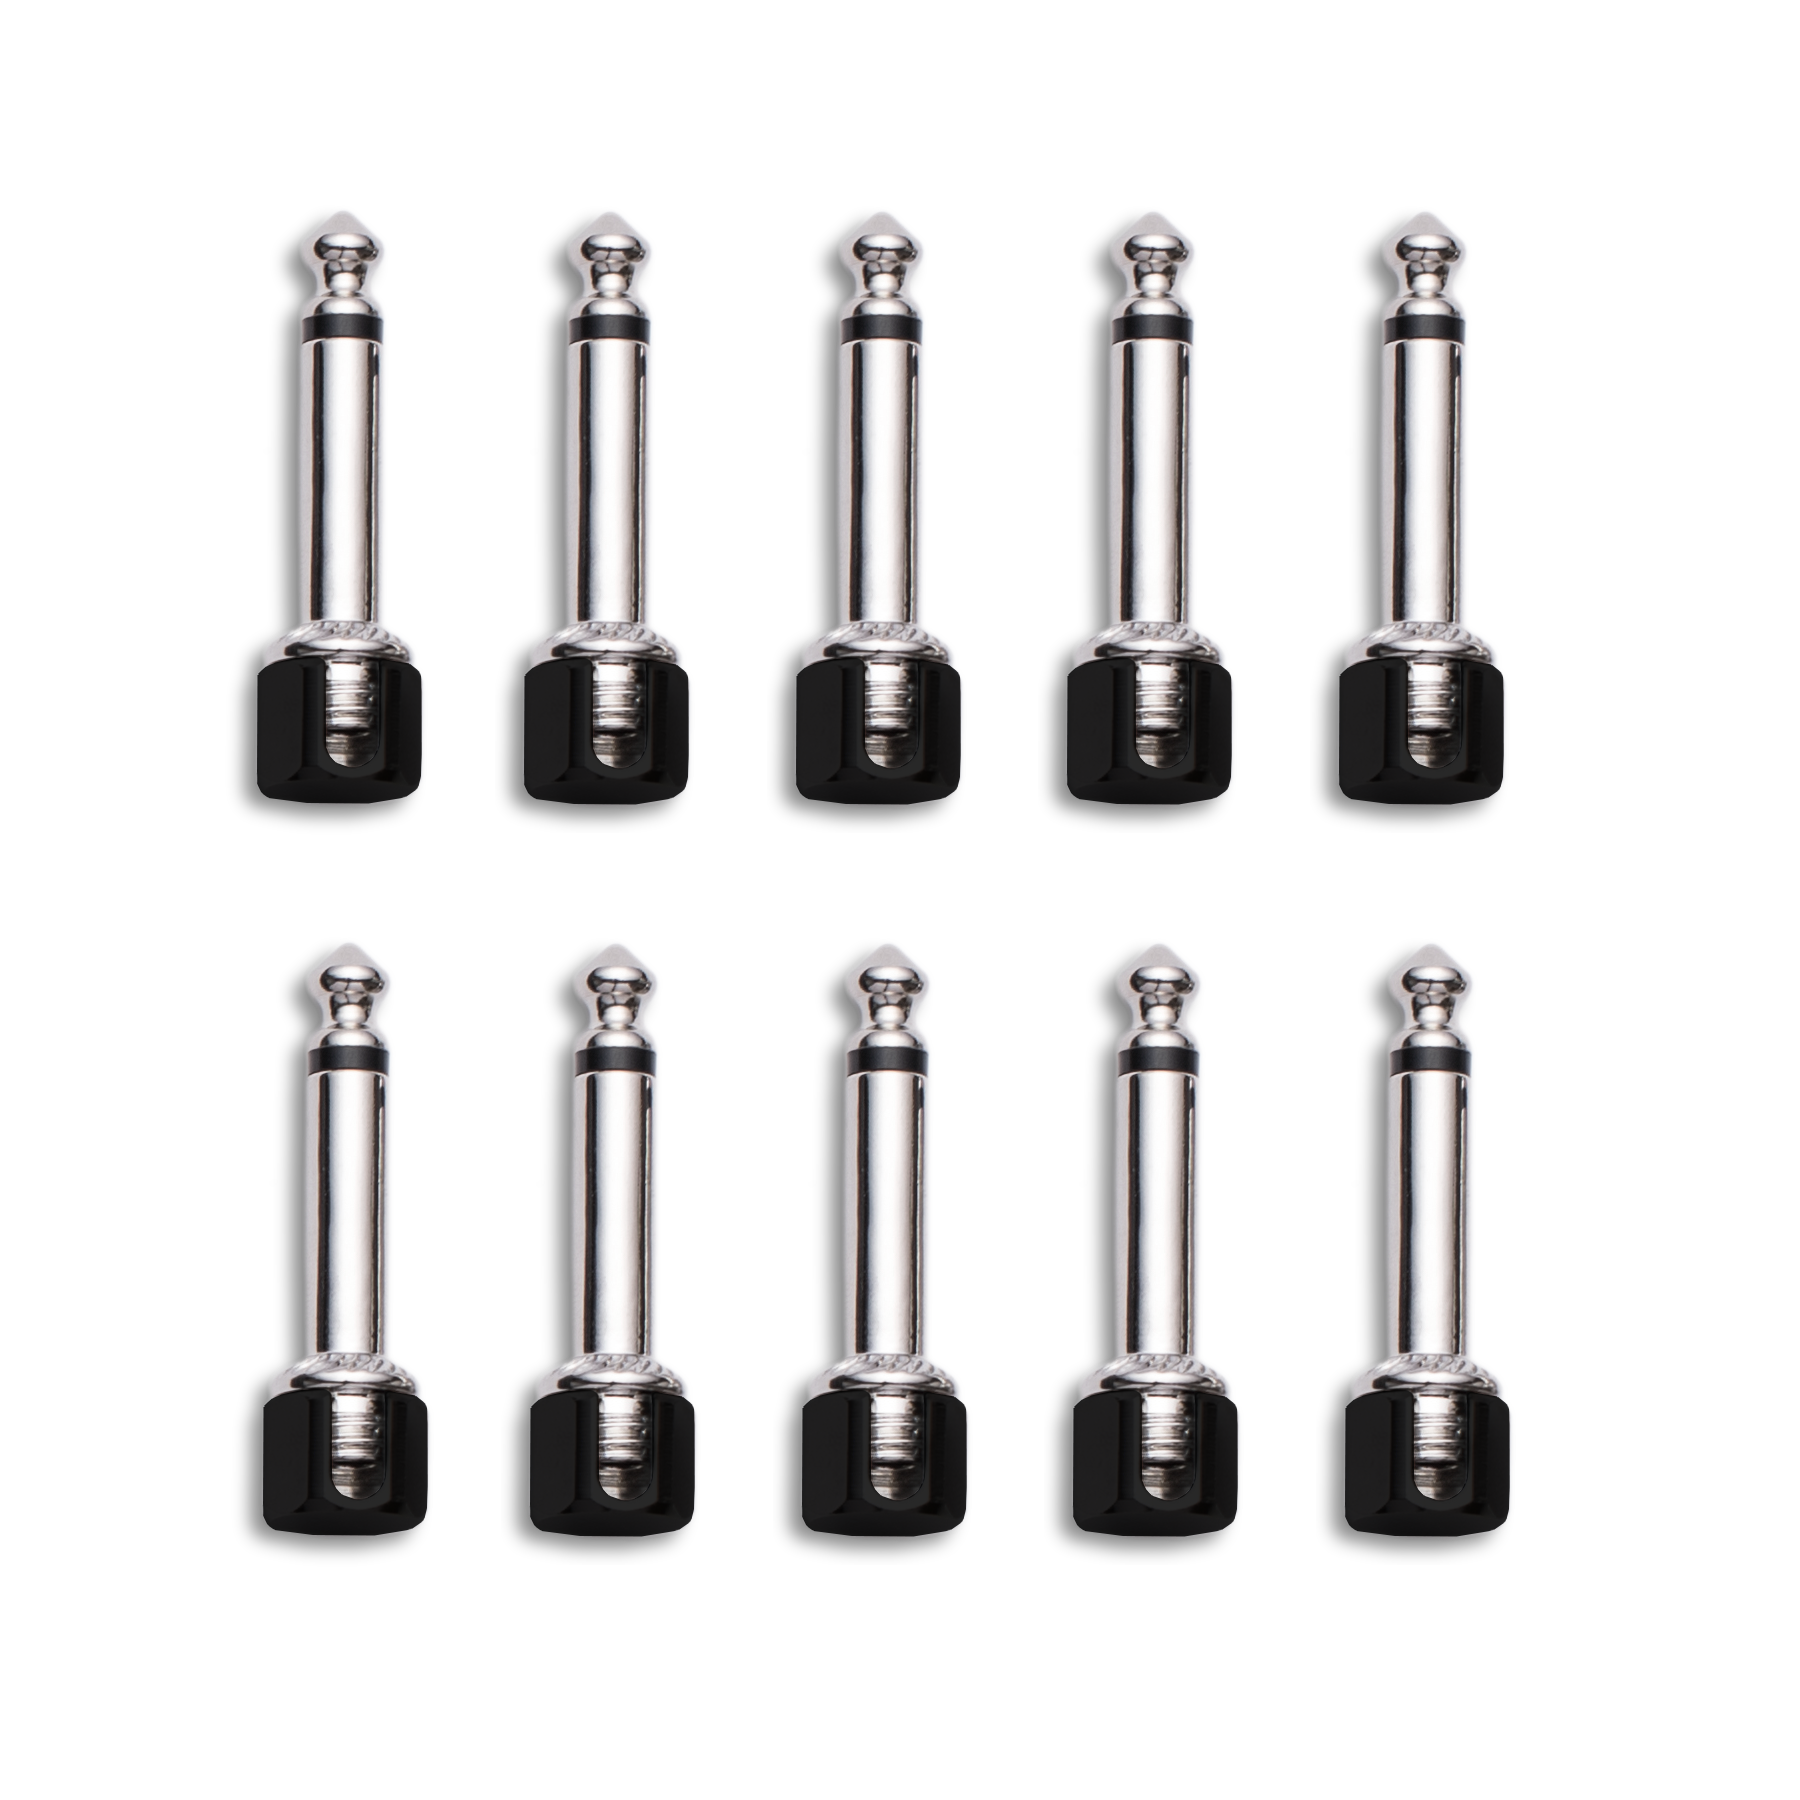 Evidence Audio SiS Right Angled Plugs in Black. Example Only quantity will vary with kit size